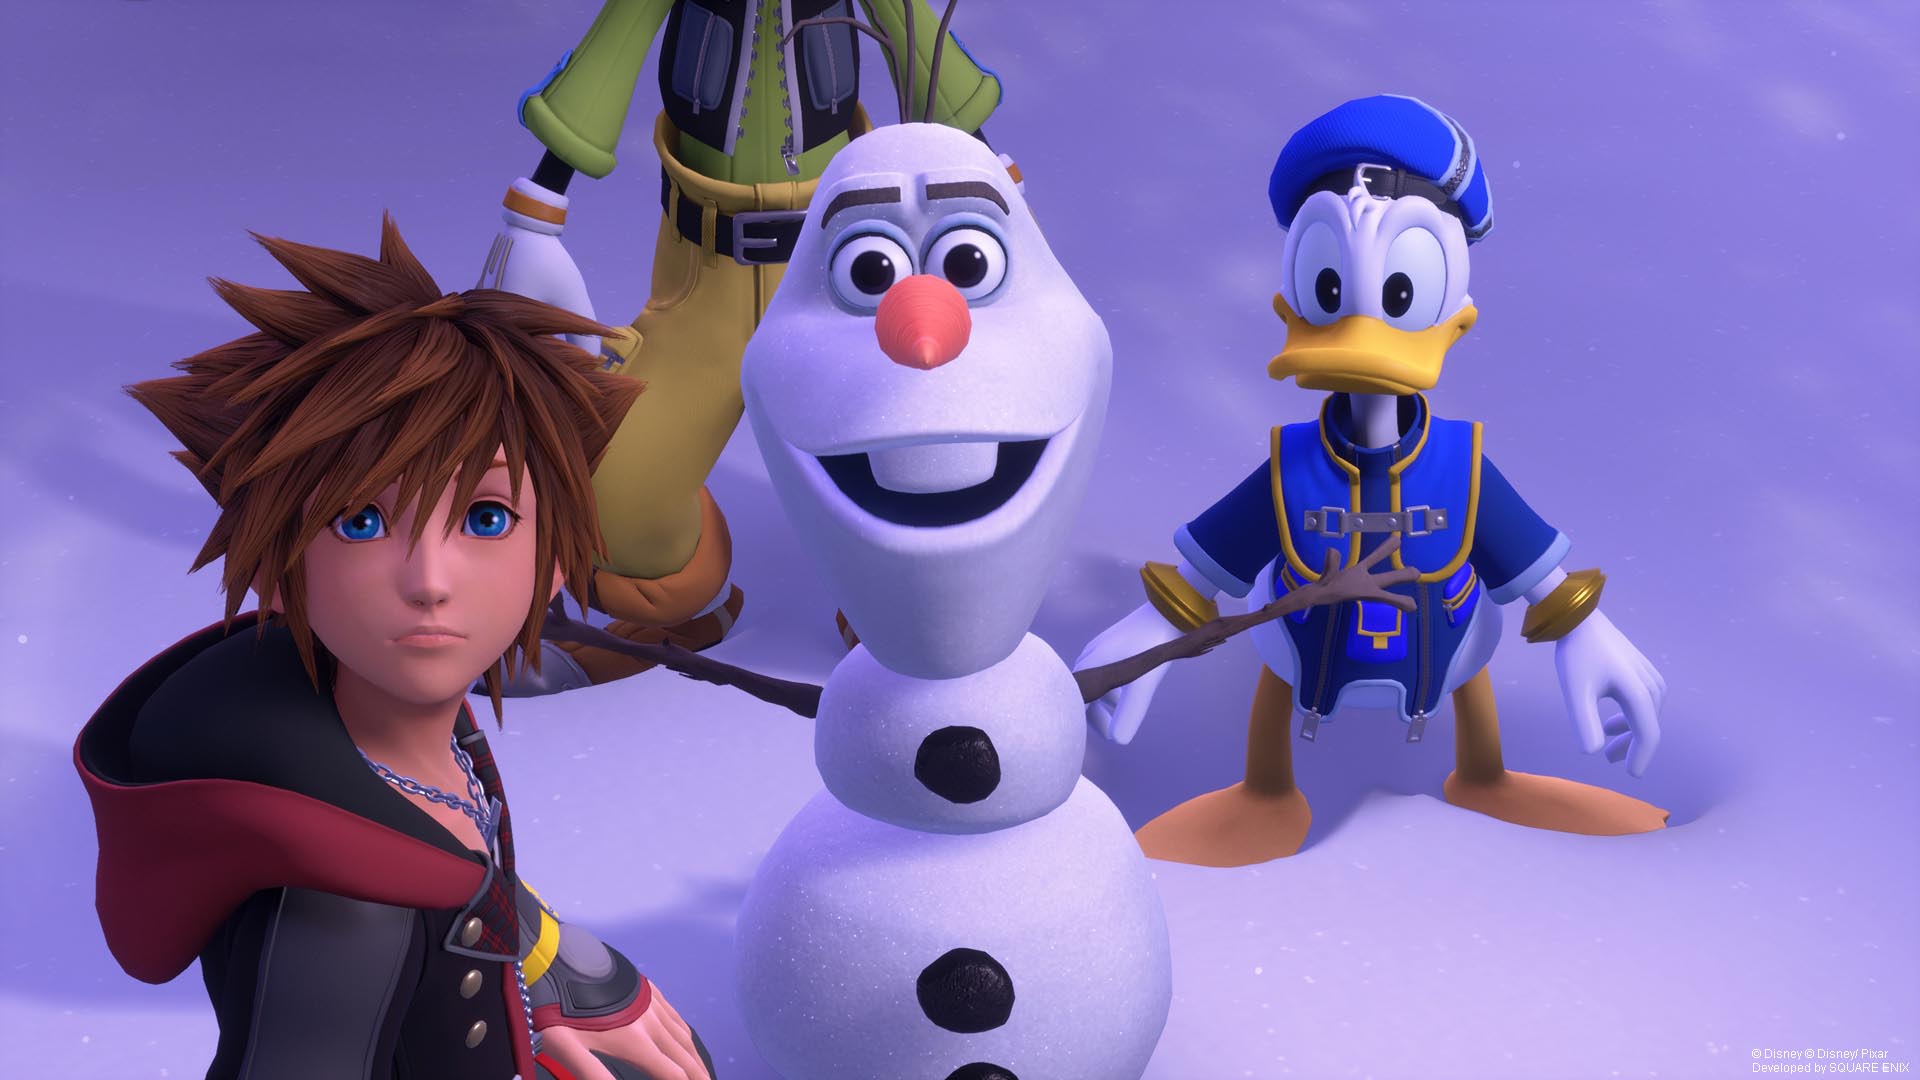 New Kingdom Hearts III Gameplay Overview Explains How to Fight